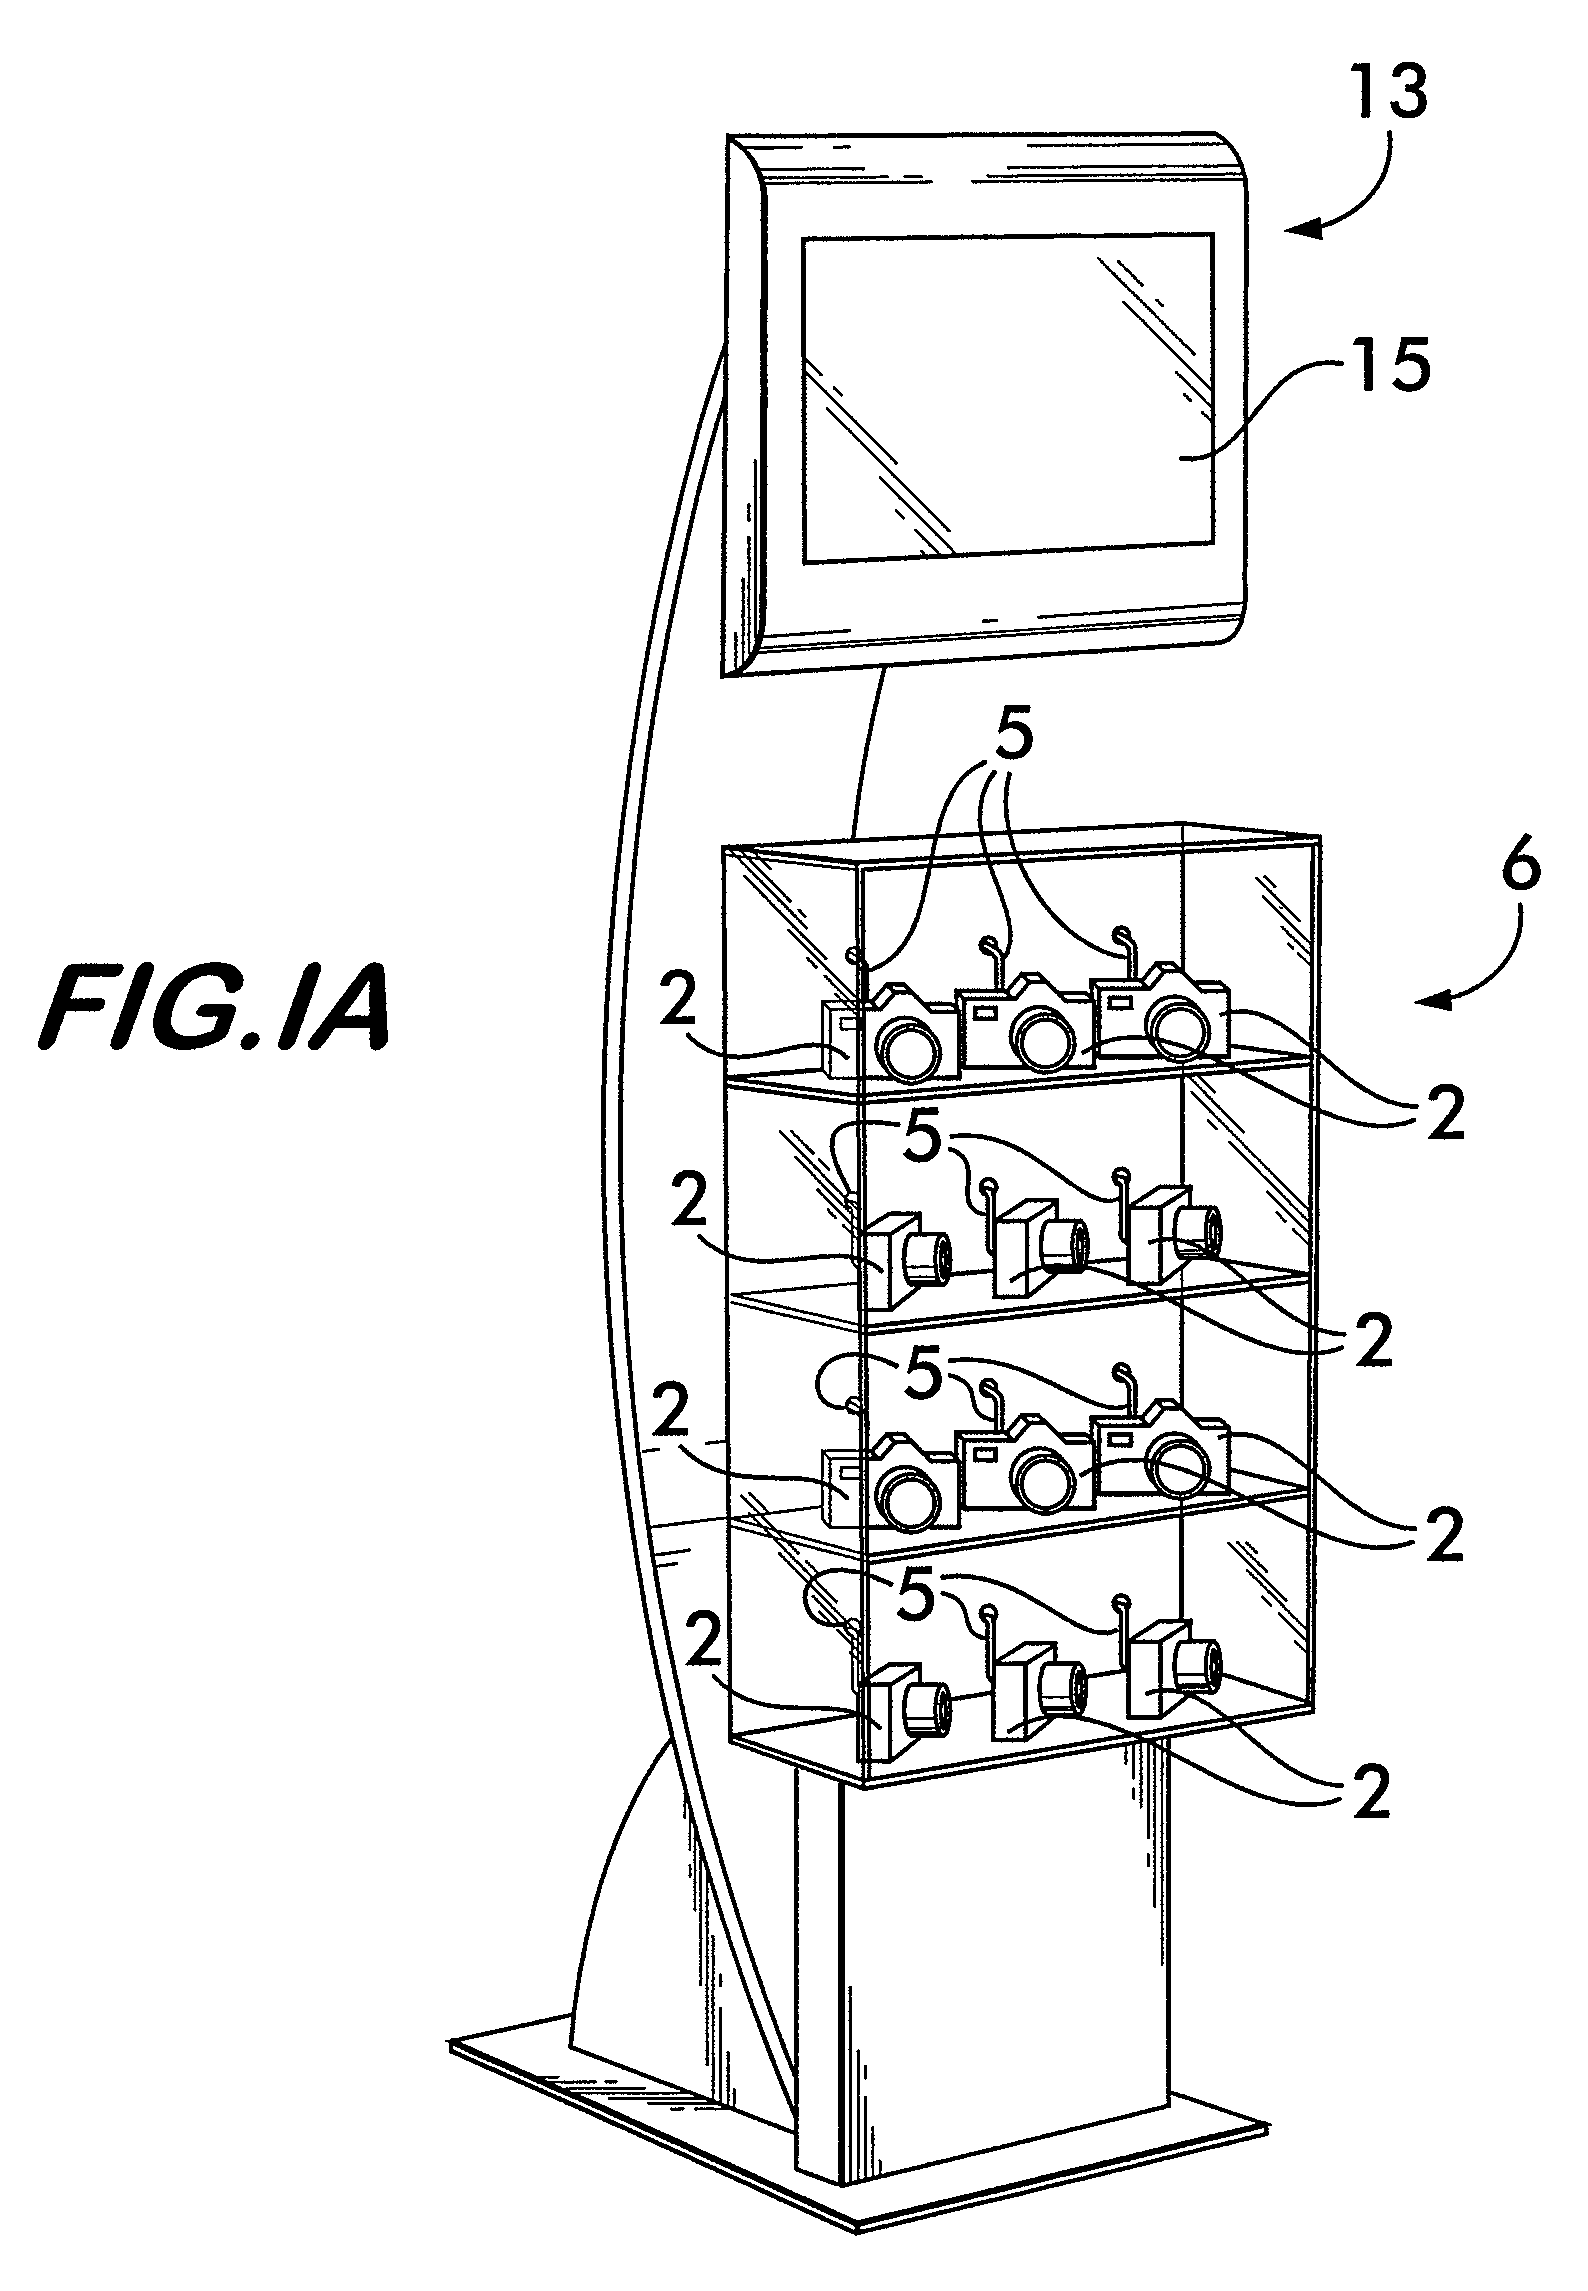 System and method for securing and displaying items for merchandising